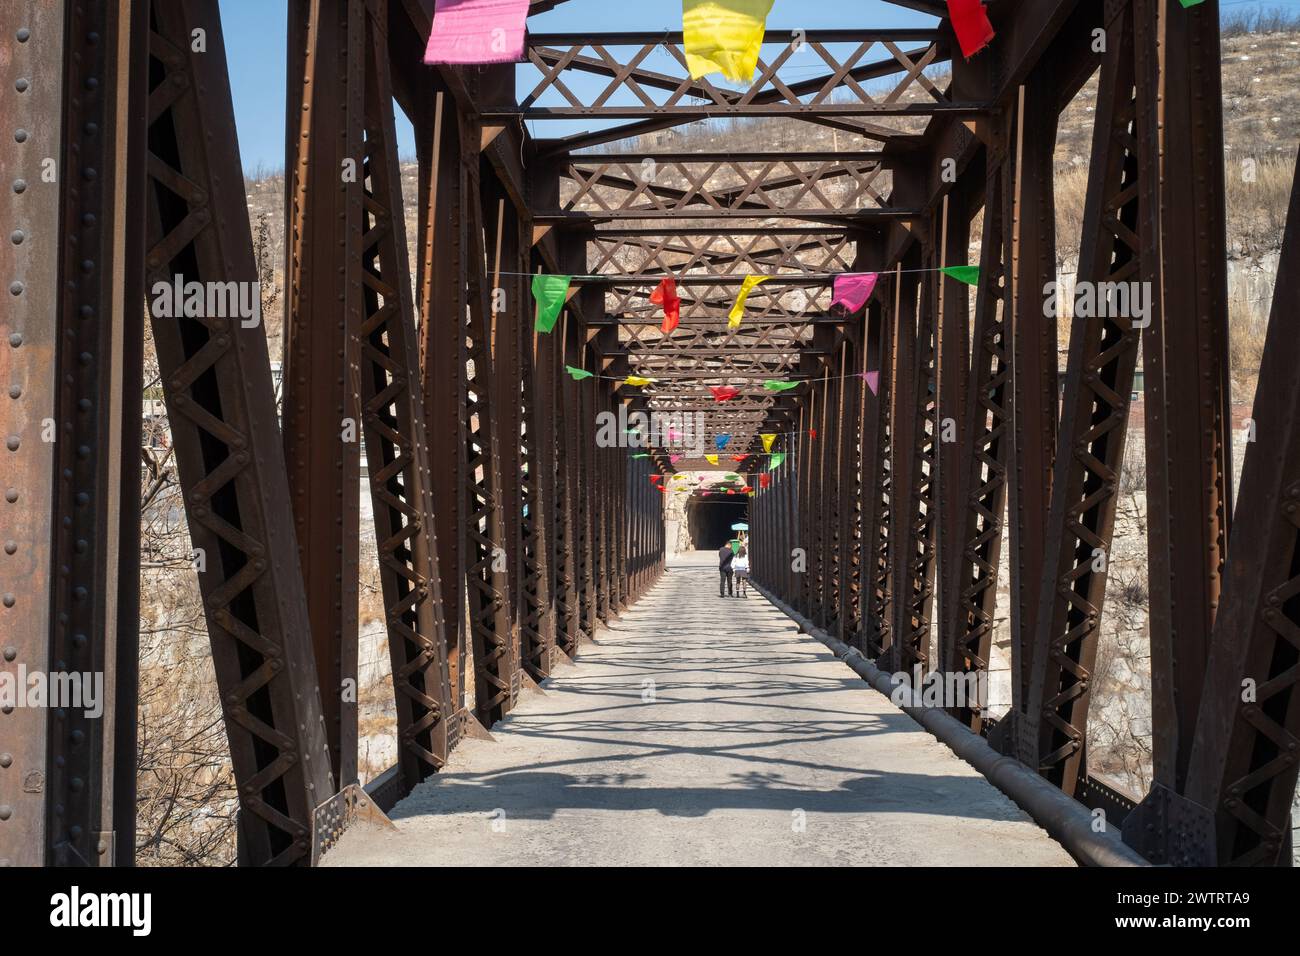 The iron bridge located in Faluling Village, Jingxing County, Shijiazhuang City, Hebei Province was built by France's Daydé & Pillé in 1906. It is st Stock Photo